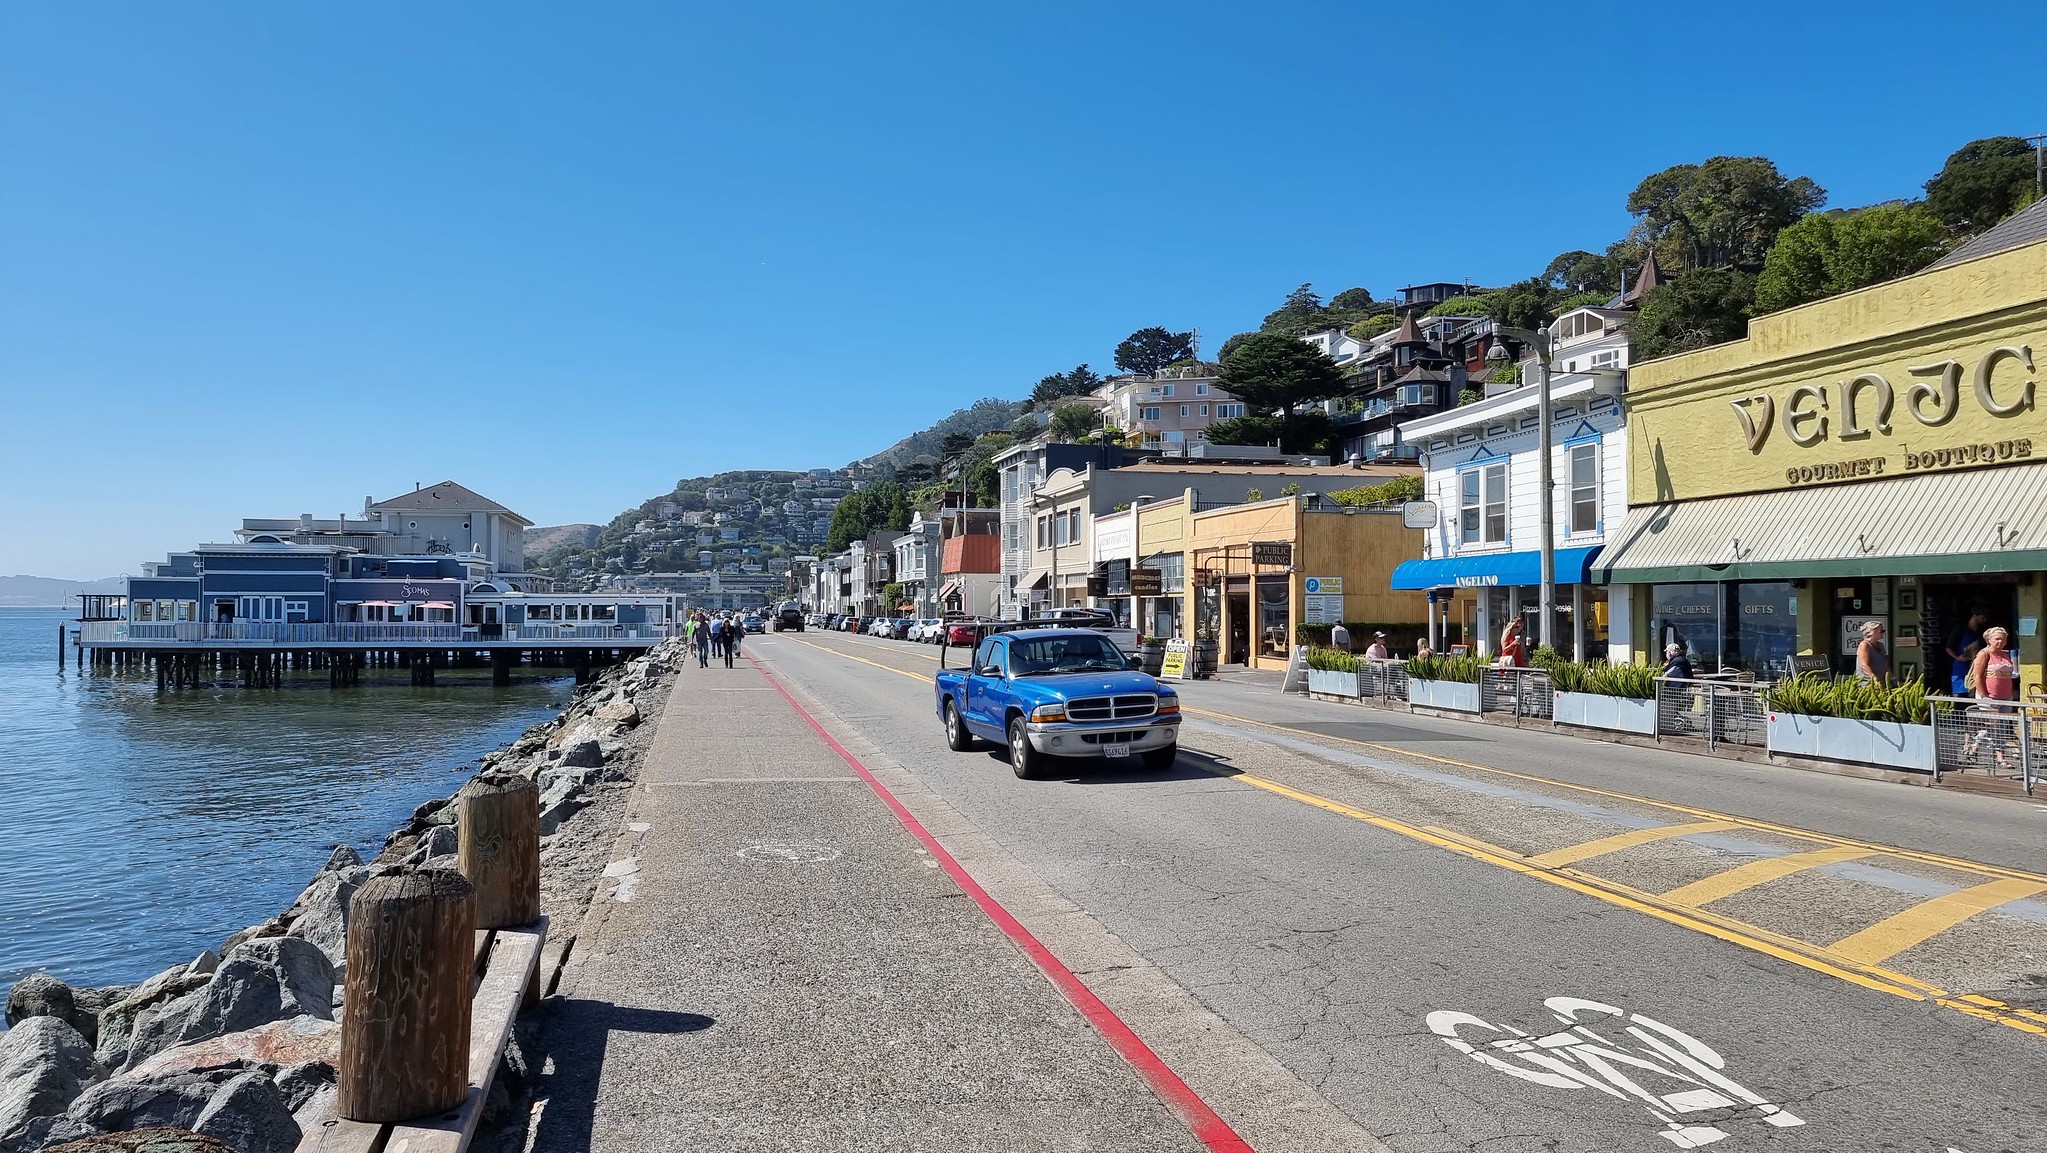 The lovely little town of Sausalito